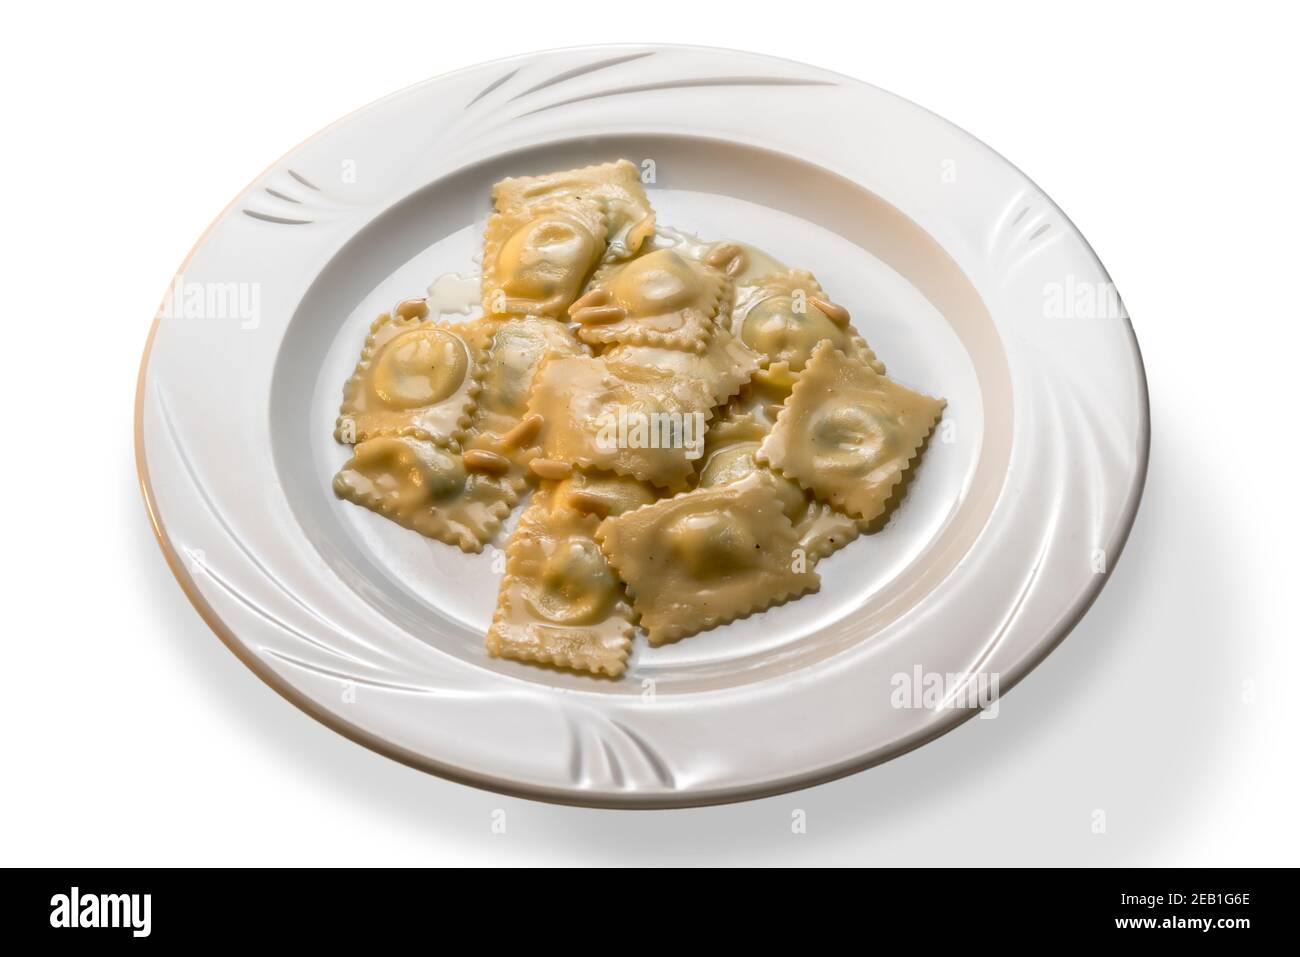 Ravioli - Italian stuffed egg pasta topped with pine nuts and butter sauce in white dish on white background Stock Photo